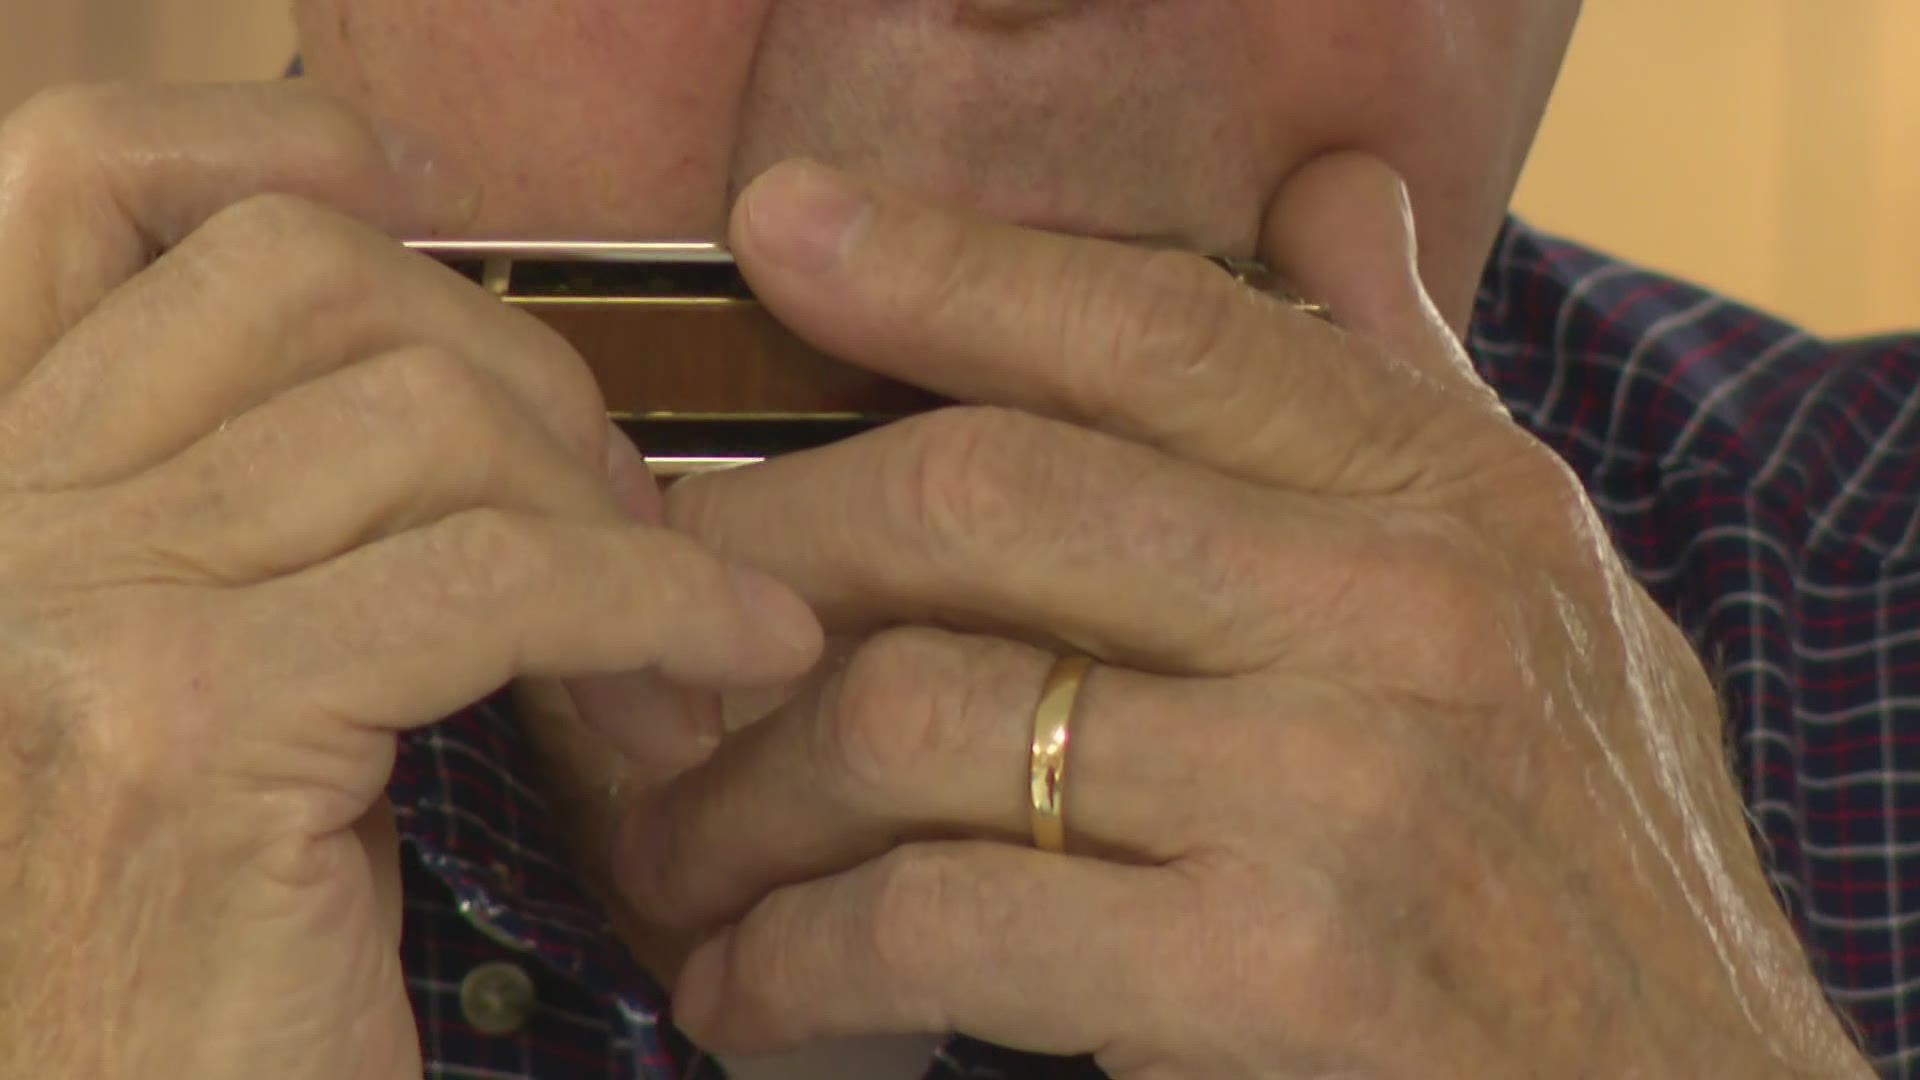 The Grand Rapids Harmonica Club has seen its membership dwindle in recent years. They're currently looking to add new members.